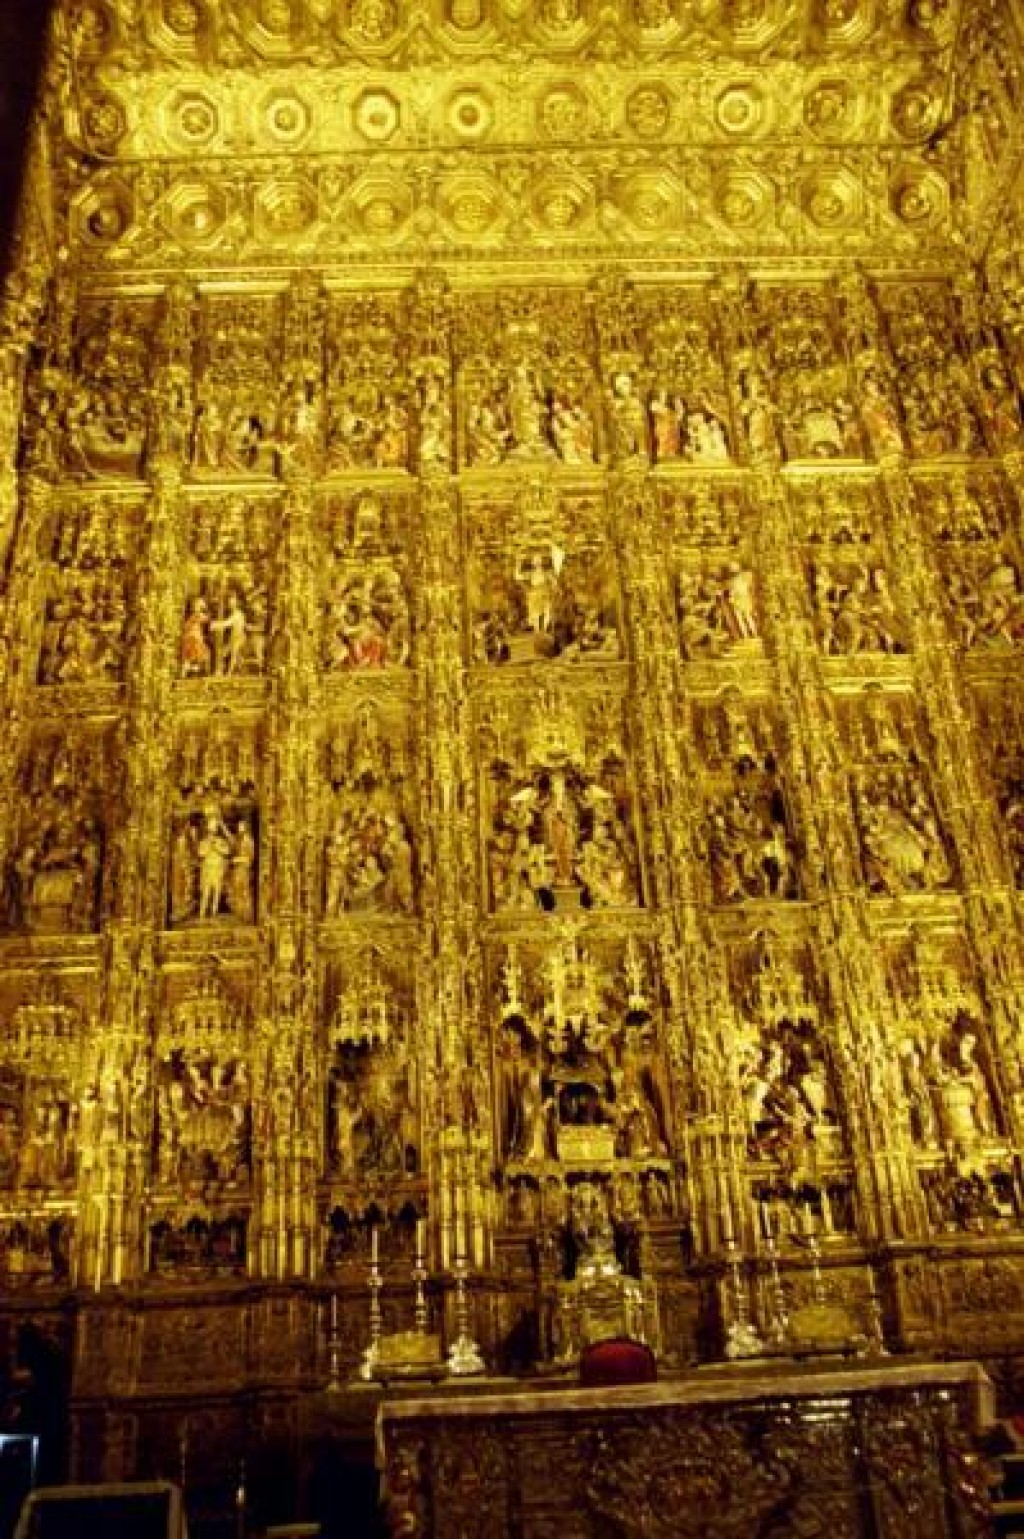 This altarpiece is on the largest in the world.  There is 36 biblical scenes depicted in gold.